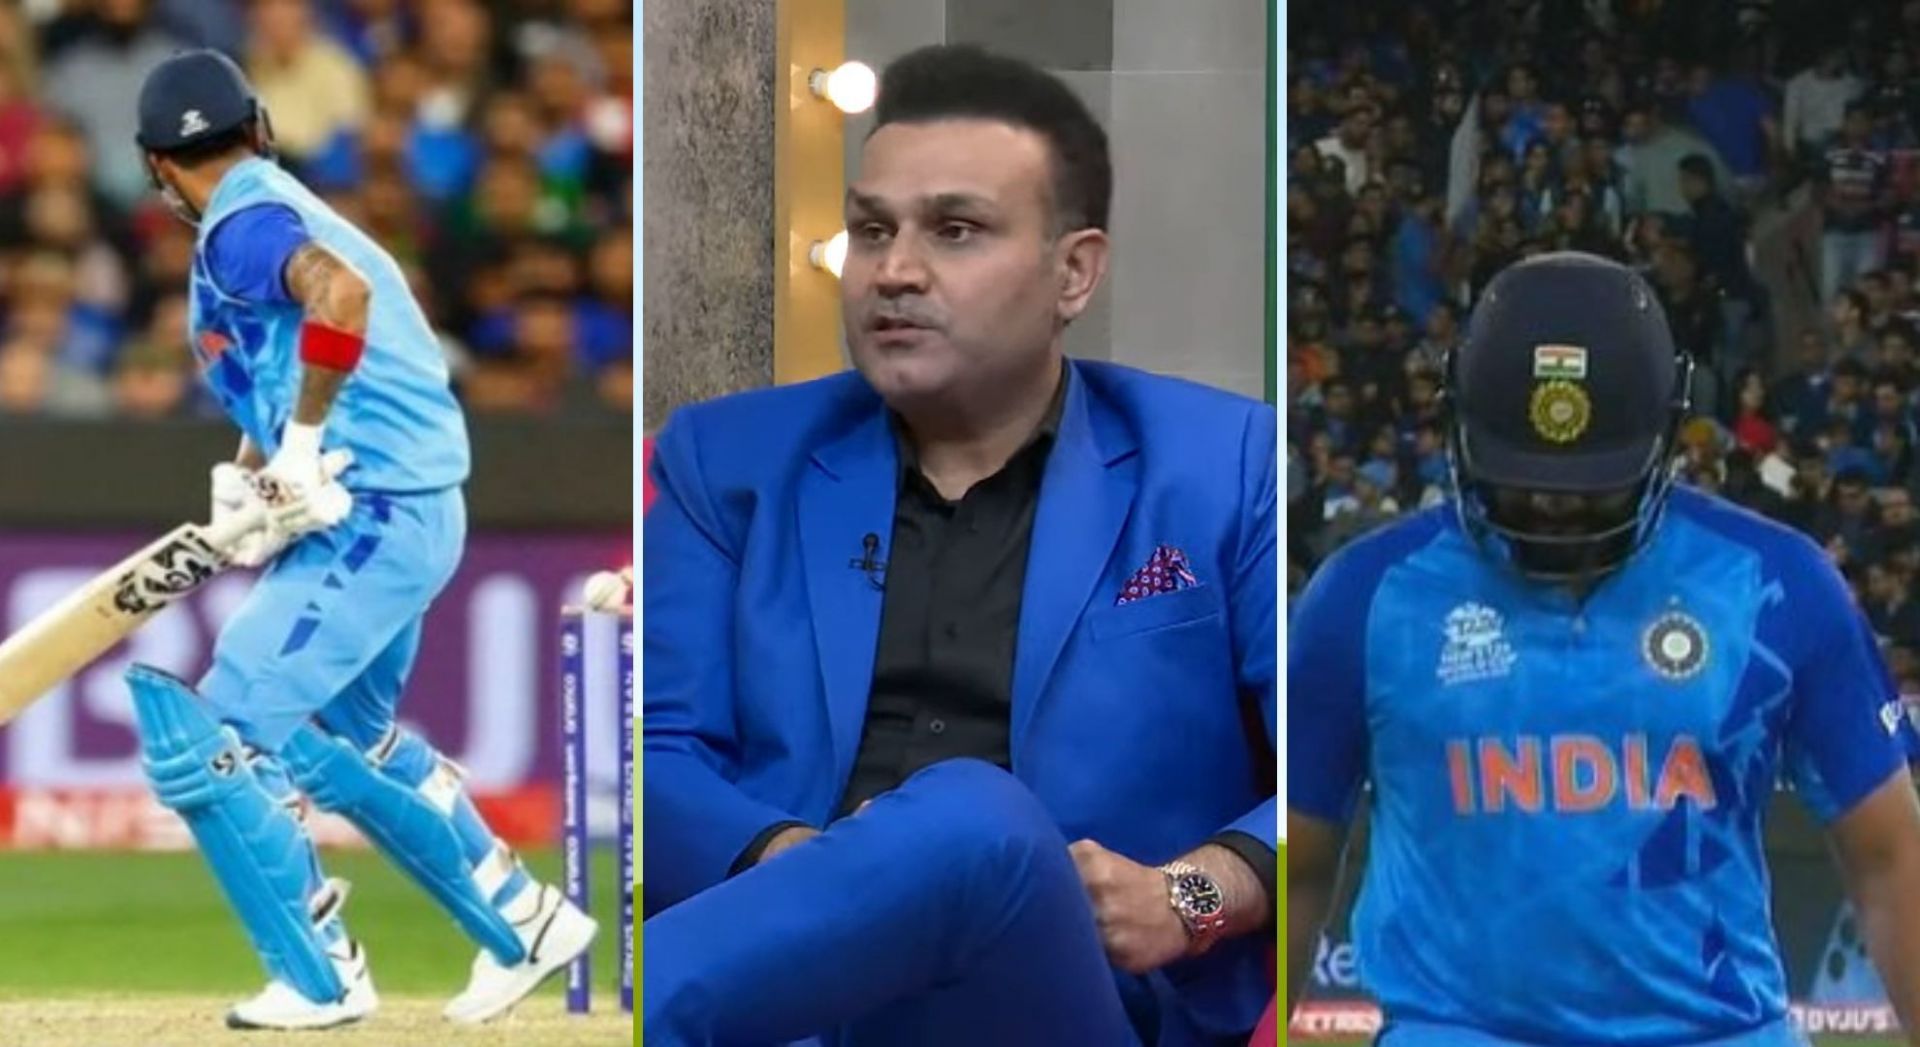 Virender Sehwag wants Rohit Sharma and KL Rahul to decide who will play the role of an aggressor in upcoming matches. 